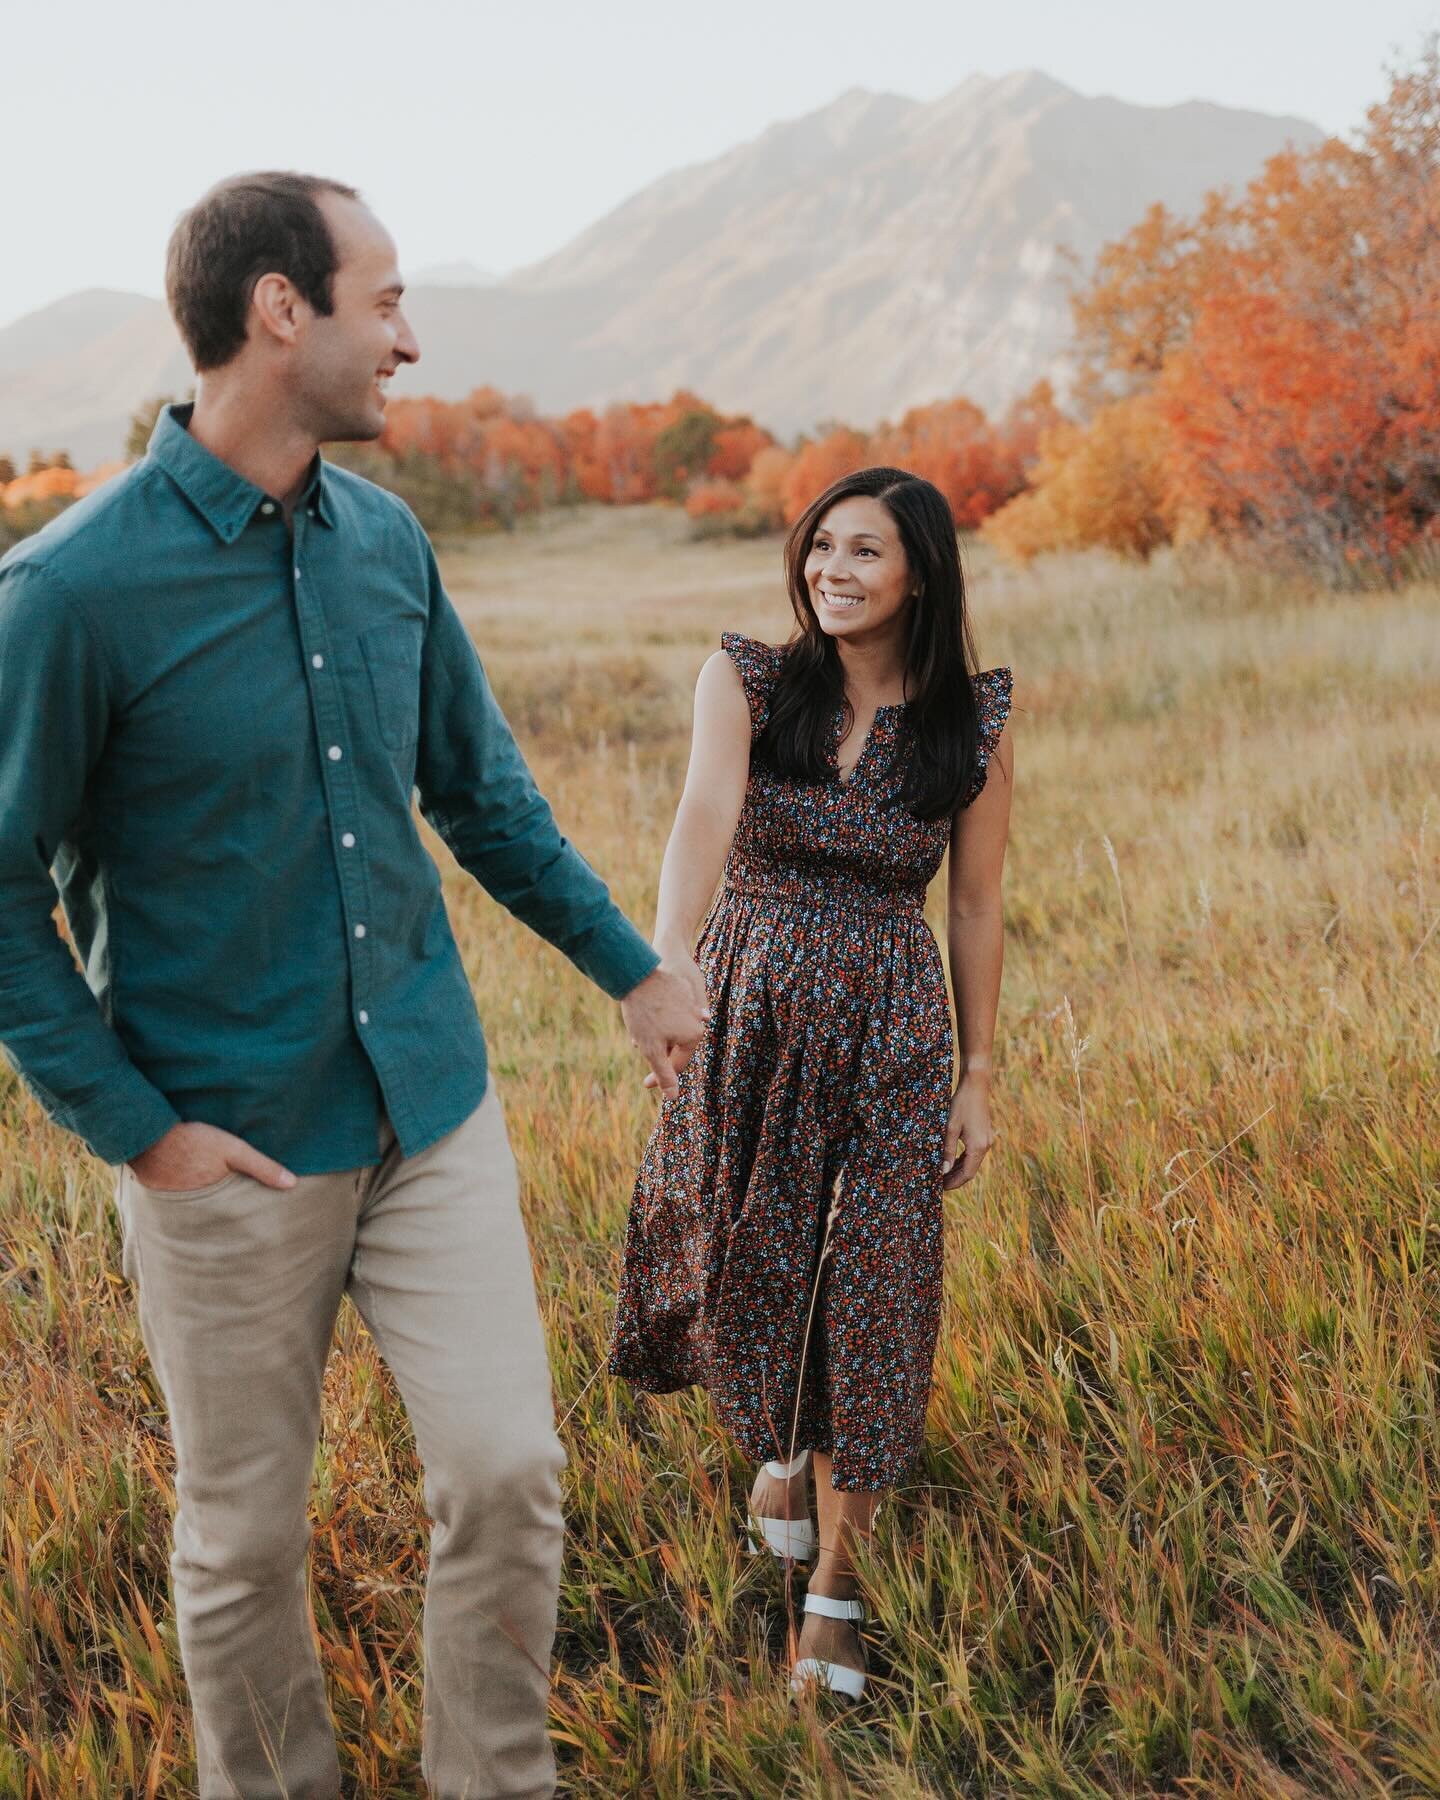 Look at this cute couple 😍 still obsessed with this session
.
.
.
.
.
#slcweddingphotographer #utahengagements #draperphotographer #oremphotographer 
#parkcityphotographer #utahvalleyphotographer #southjordanphotographer #slcphotographer #saltlakeci